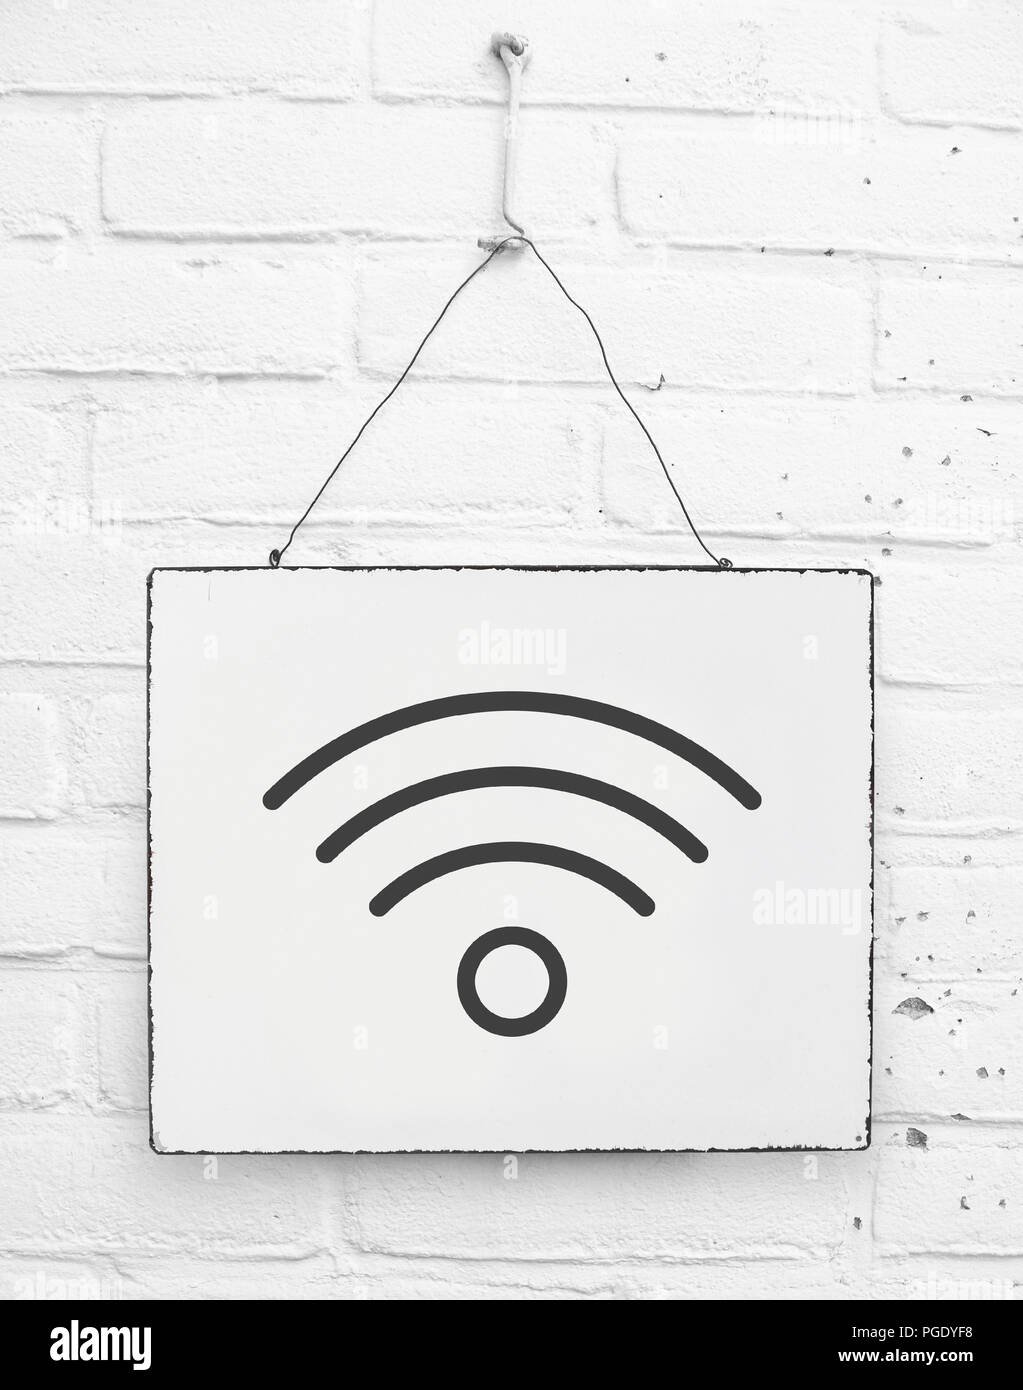 Wifi zone symbol sign on hanging board on white brick wall hotel restaurant Stock Photo